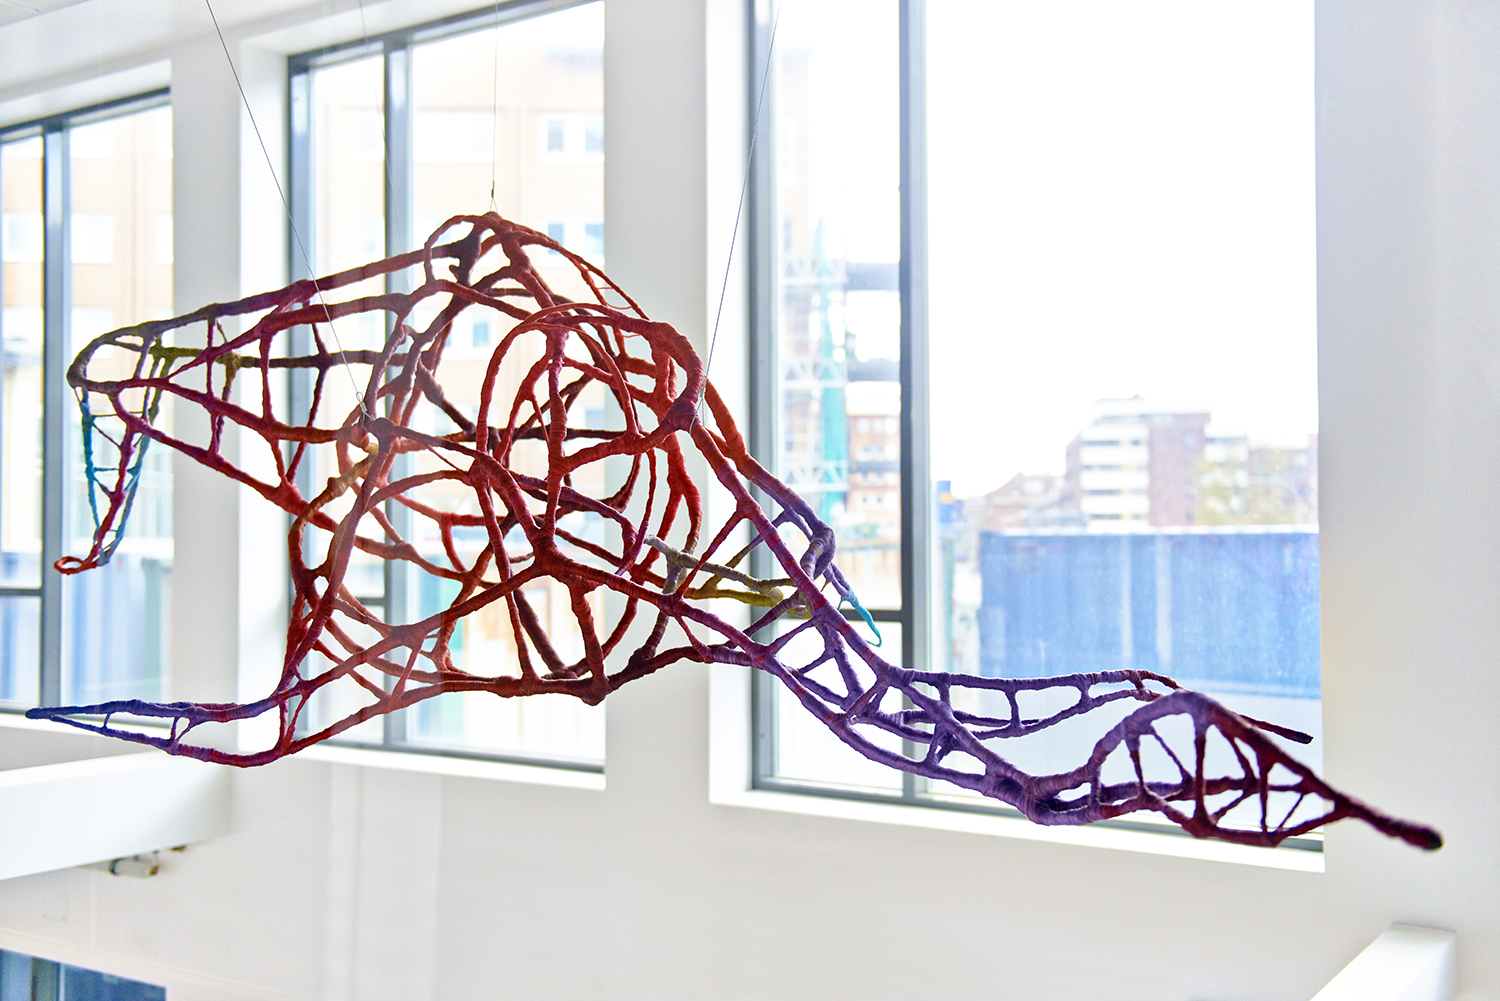 A sculpture of wires in red, purple and pink silk, Is it a fish?